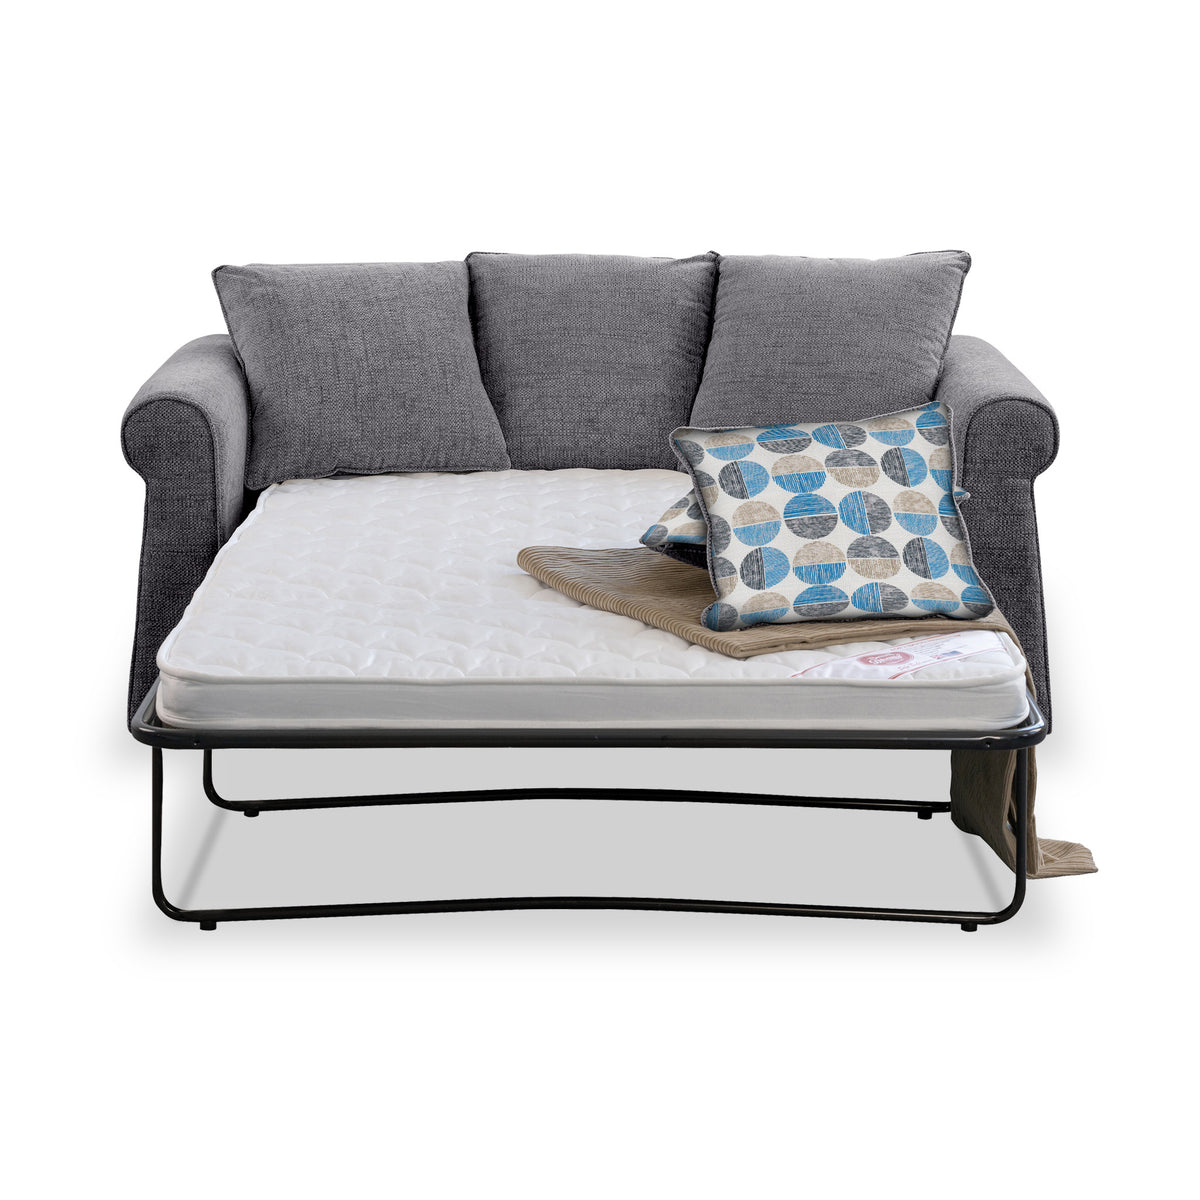 Branston Charcoal Soft Weave 2 Seater Sofabed with Blue Scatter Cushions from Roseland Furniture